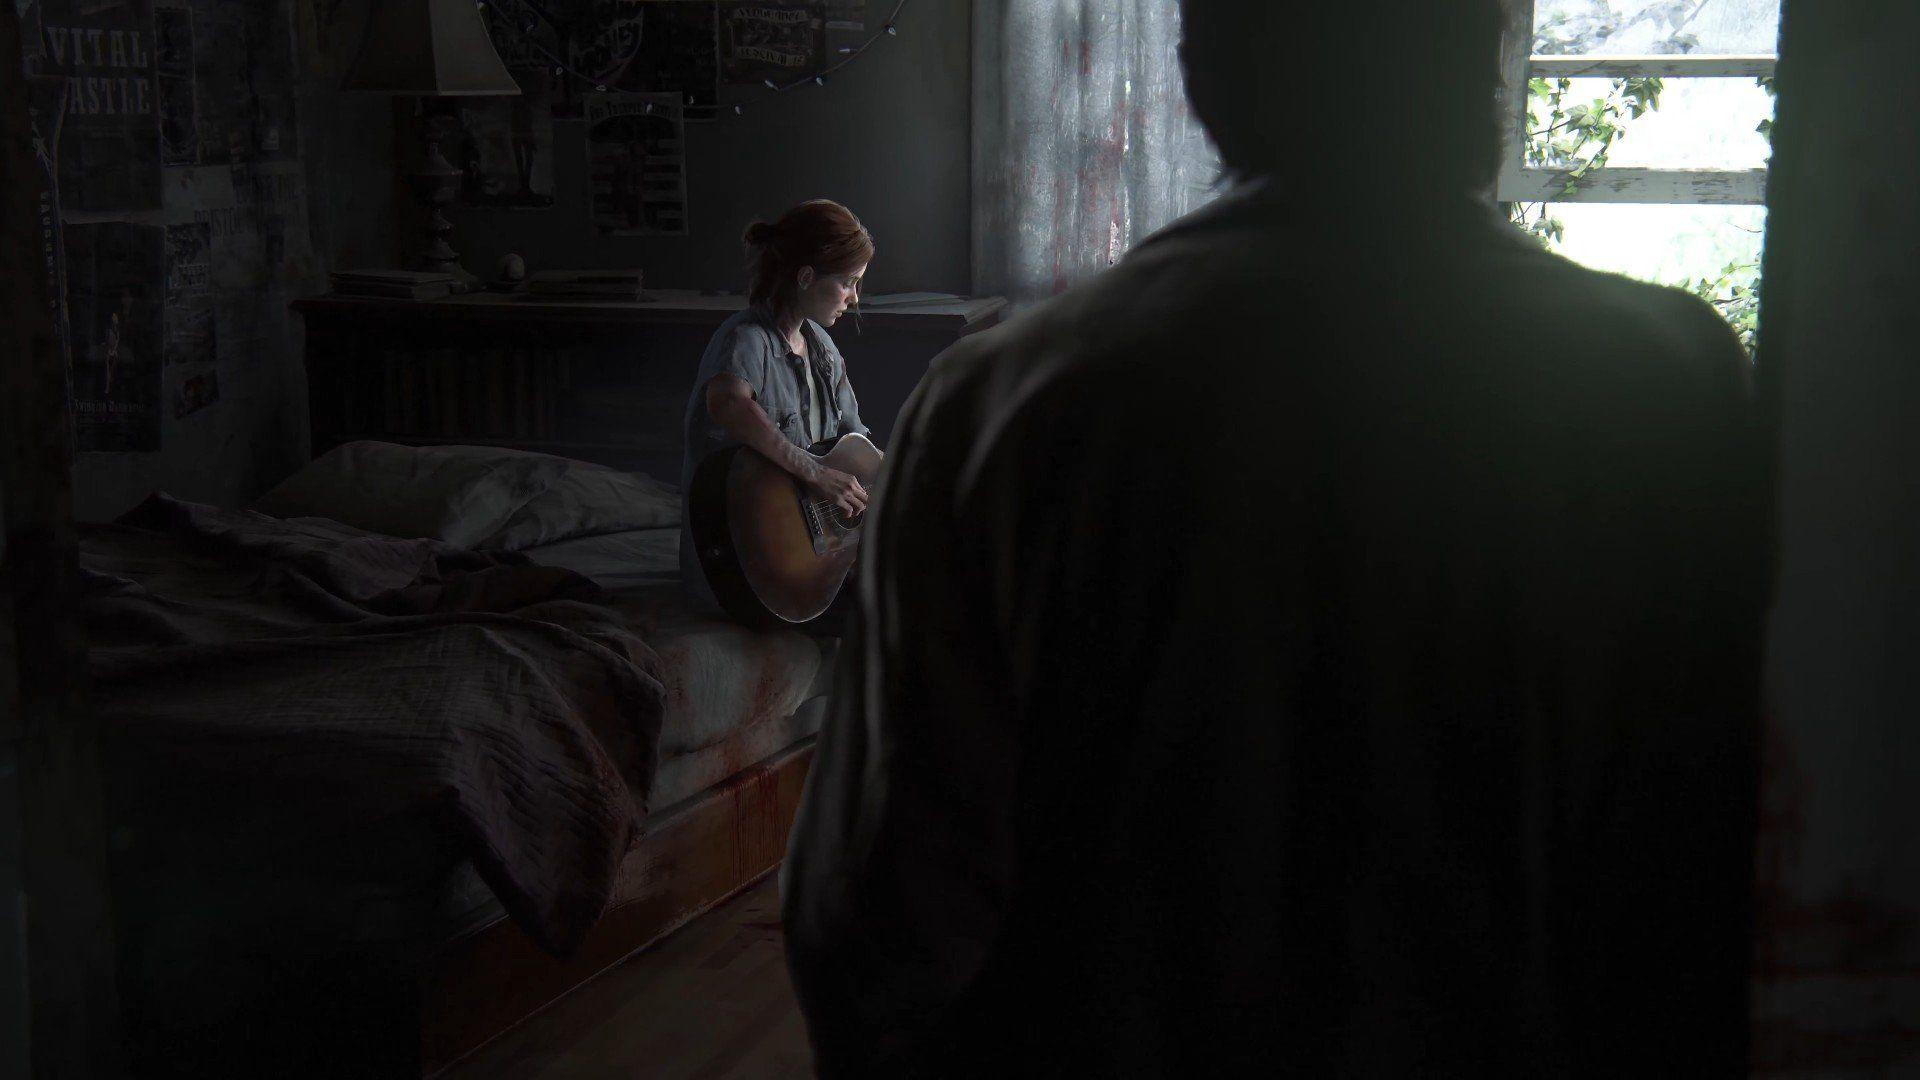 The Last Of Us 2 Wallpapers Wallpaper Cave